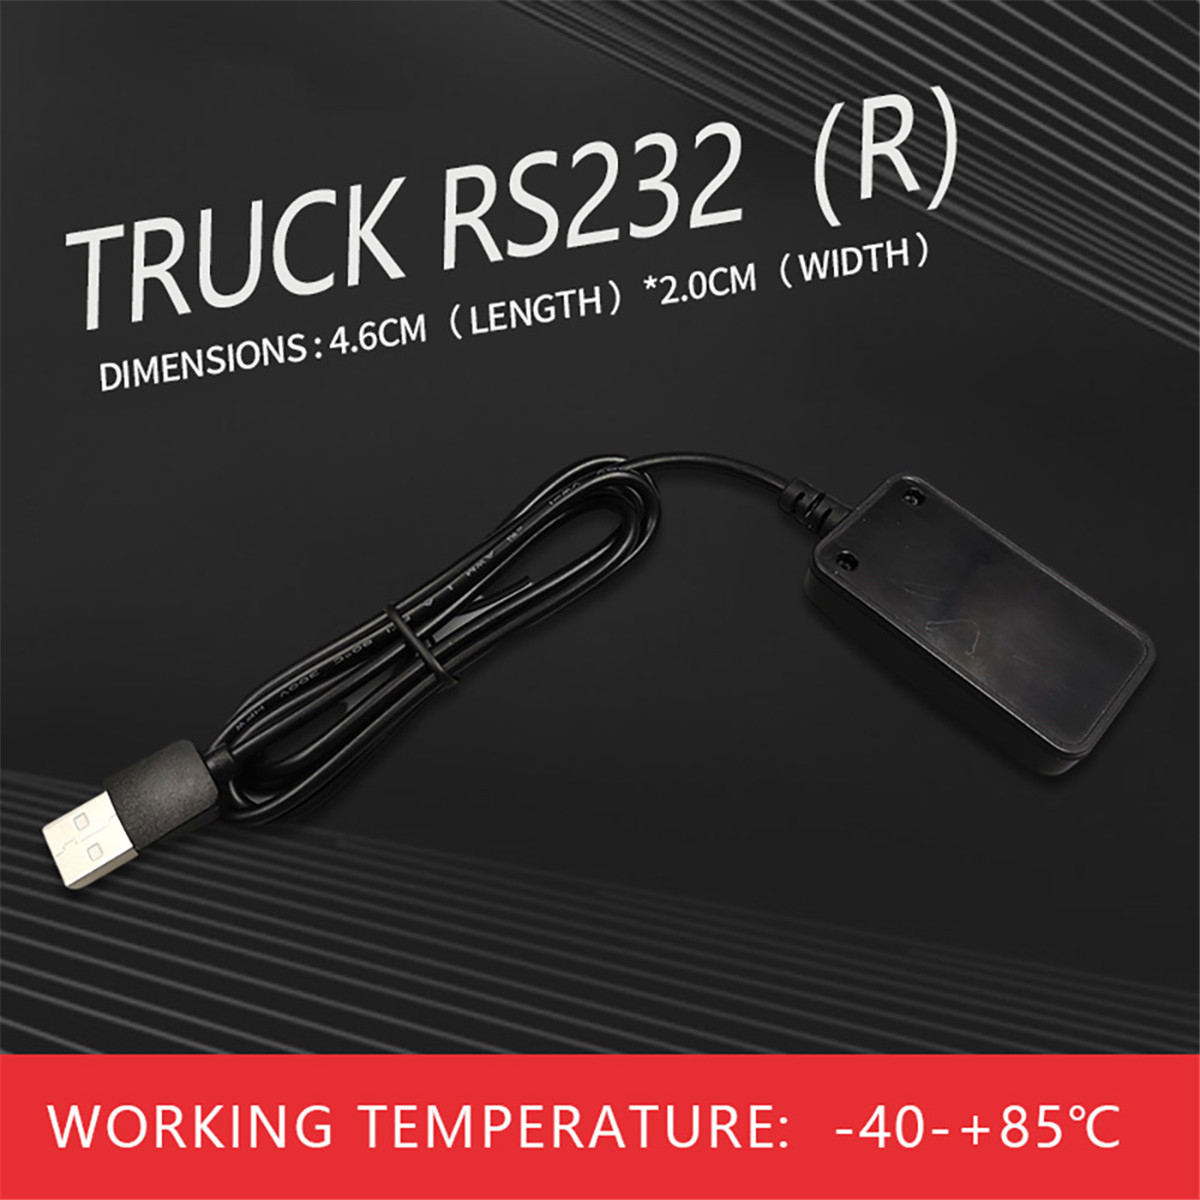 Truck RS23201 (11)